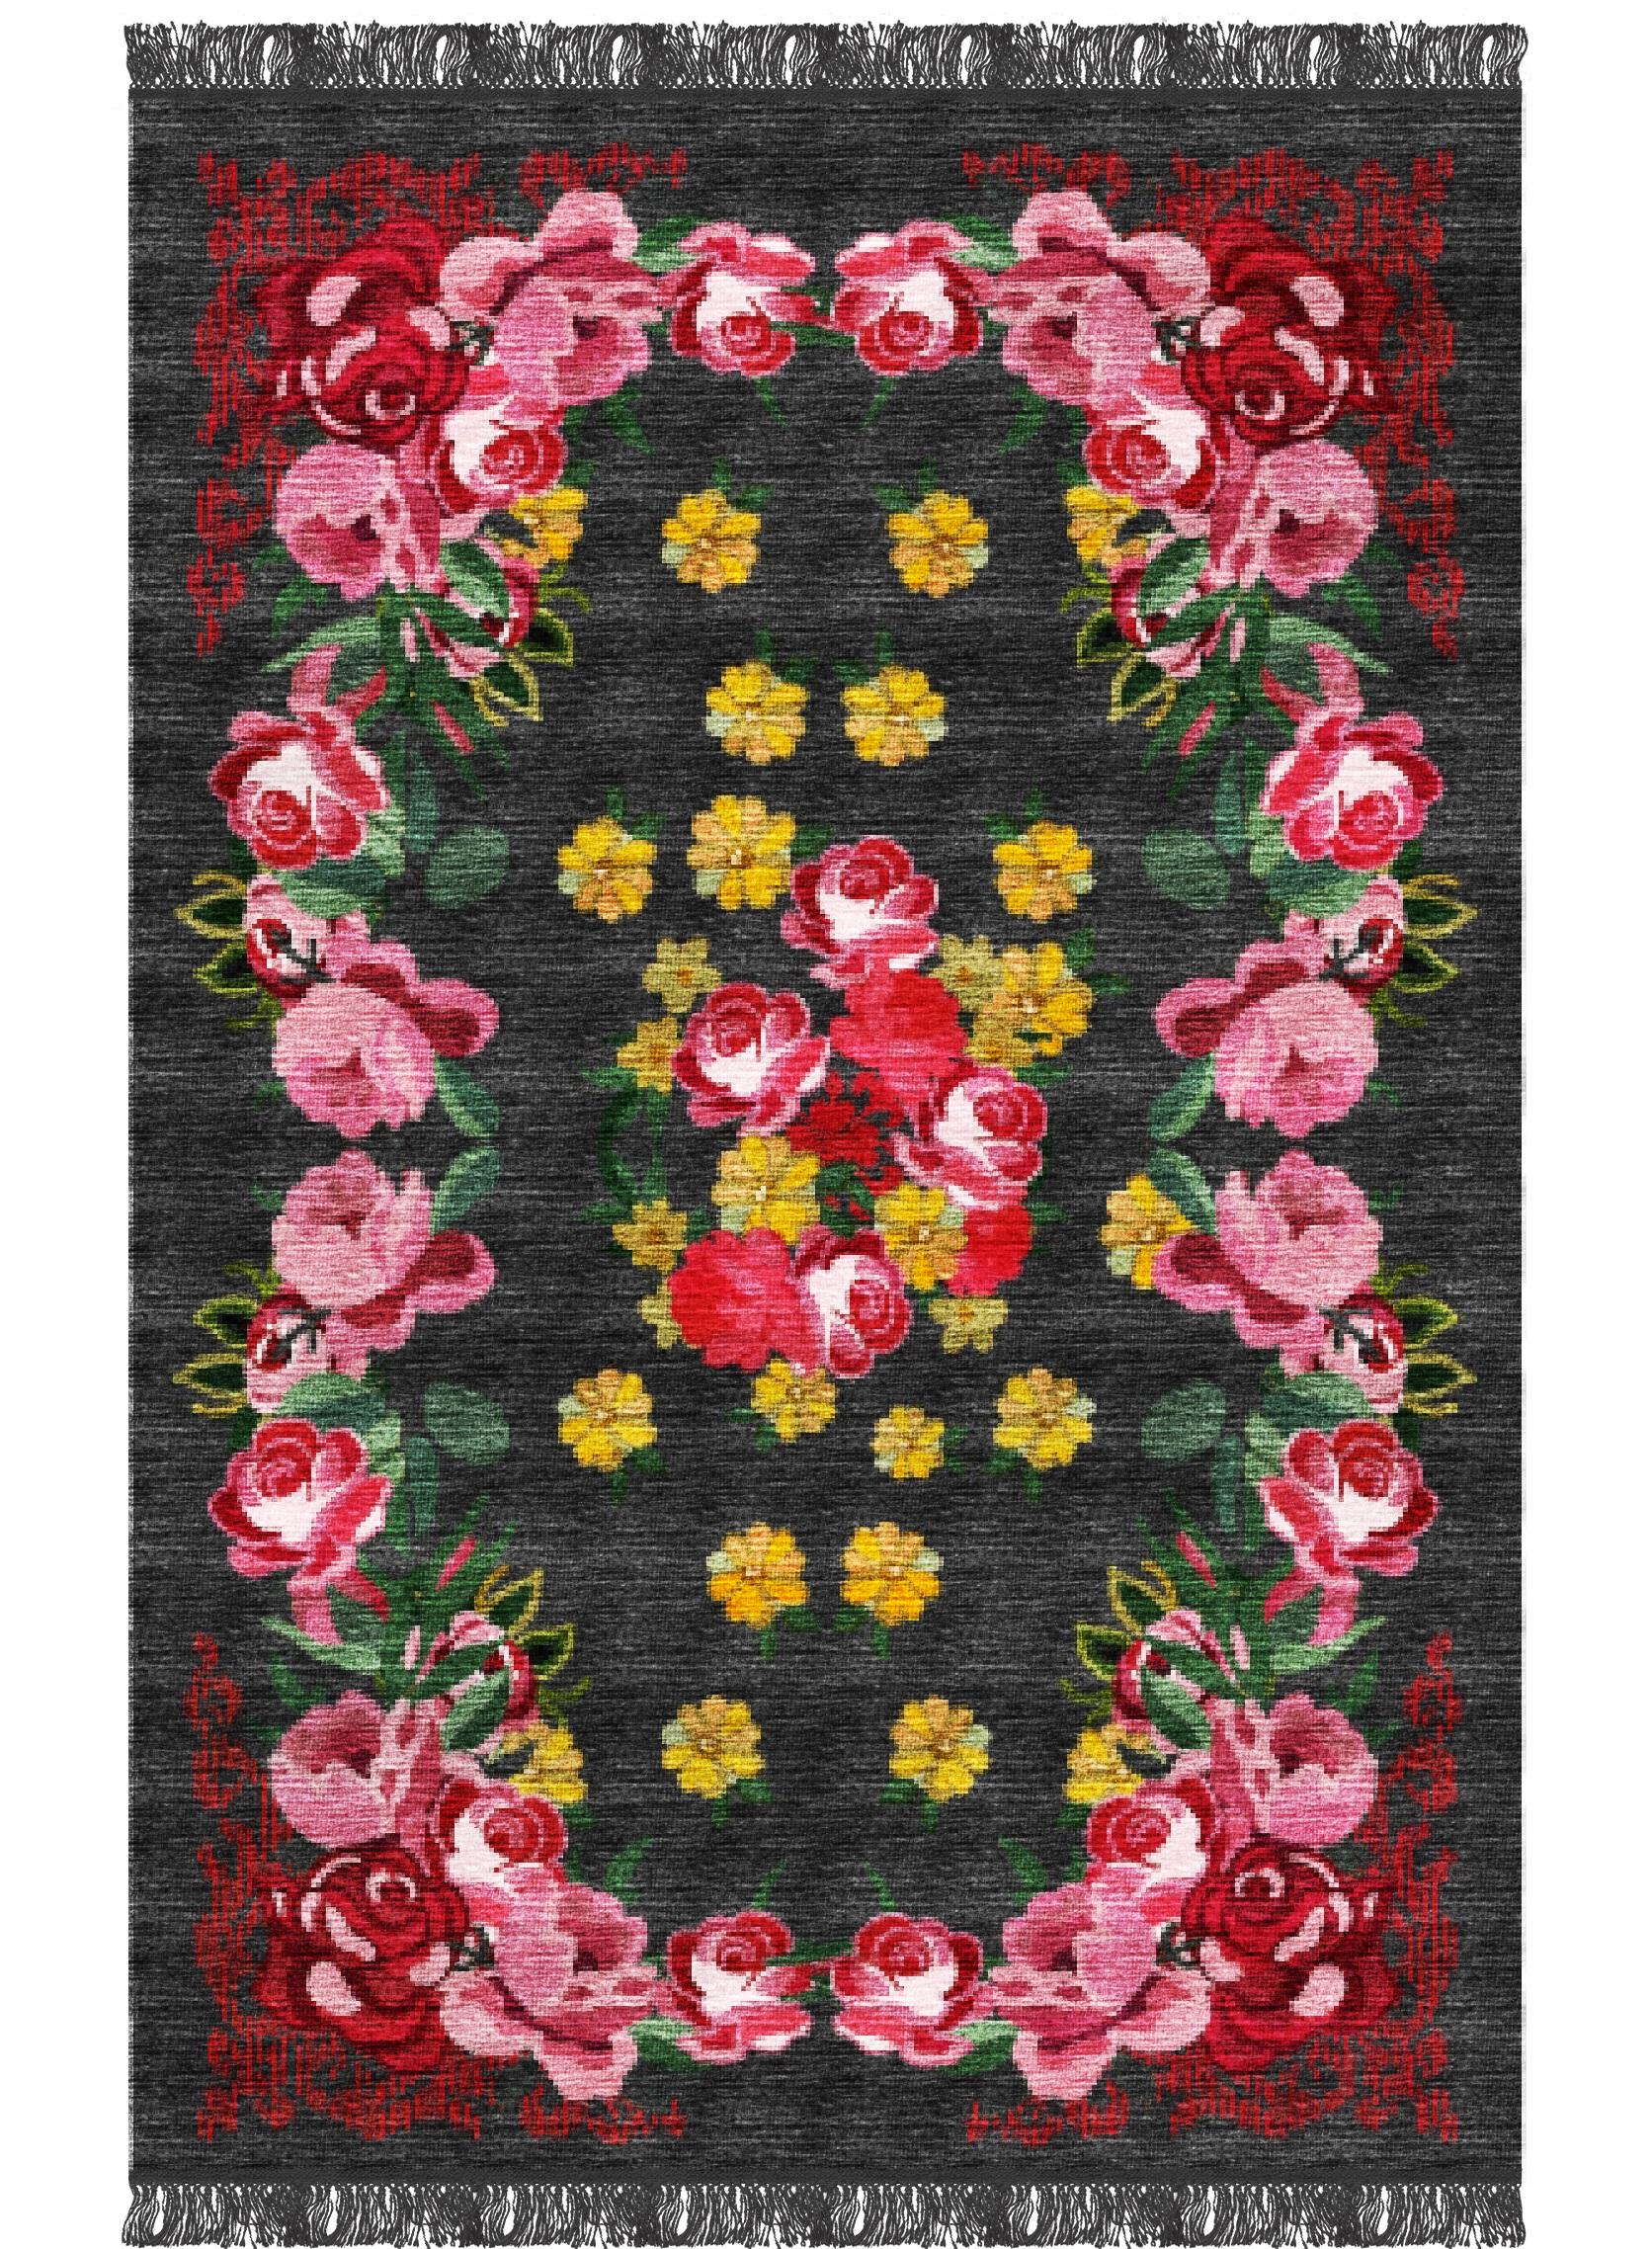 Fiori rug III by Giulio Brambilla.
Dimensions: D 300 x W 200 x H 0.5 cm
Materials: NZ wool, melange yarn.

A captivating composition inspired by Georgian art, this exquisite rug is a contemporary design by artist and architect Giulio Brambilla.